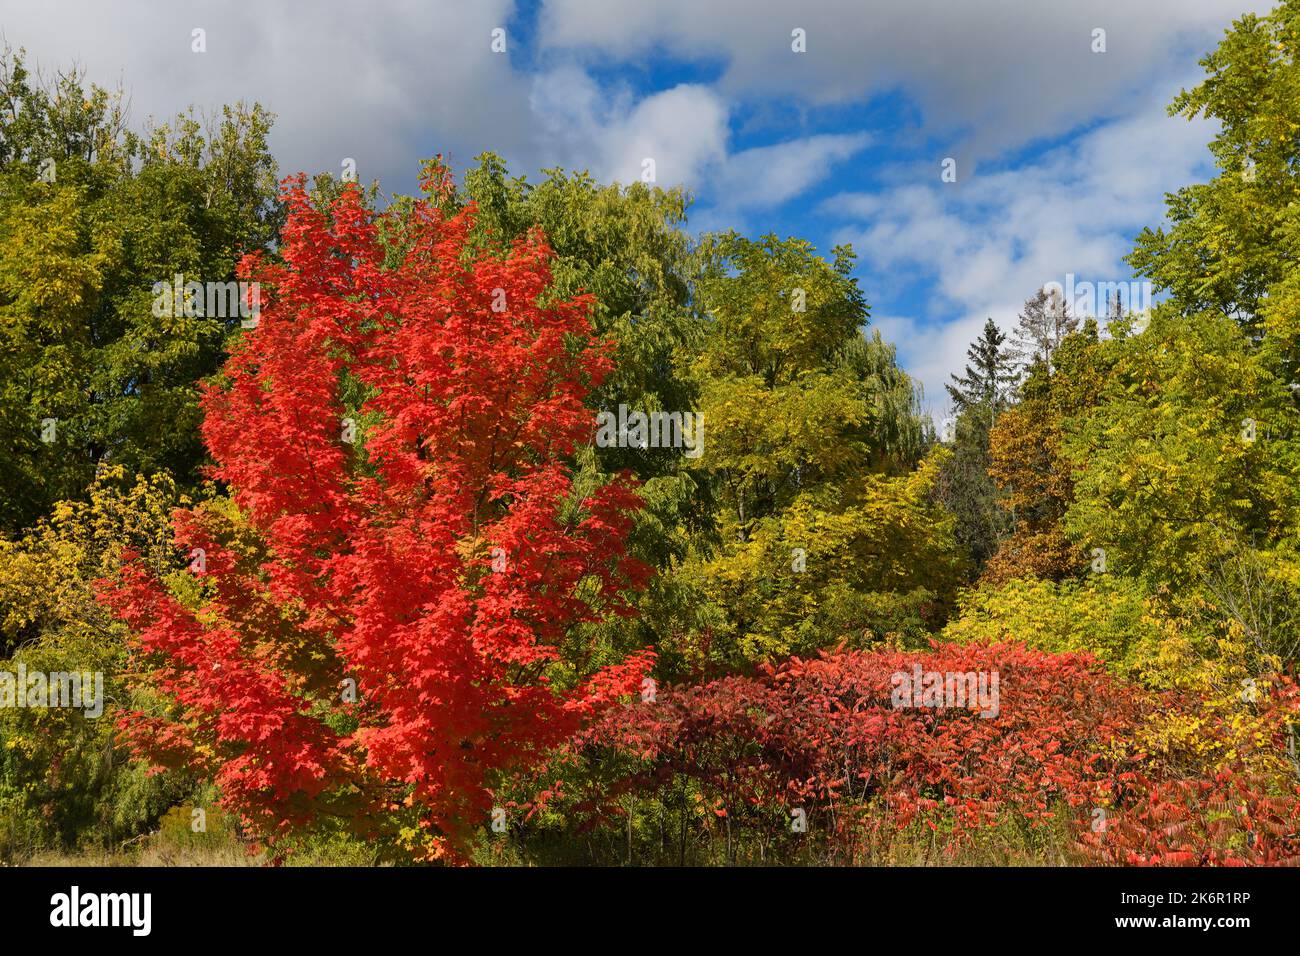 Single Maple tree with bright red leaves and Sumac with green forest in October Ontario Canada Stock Photo